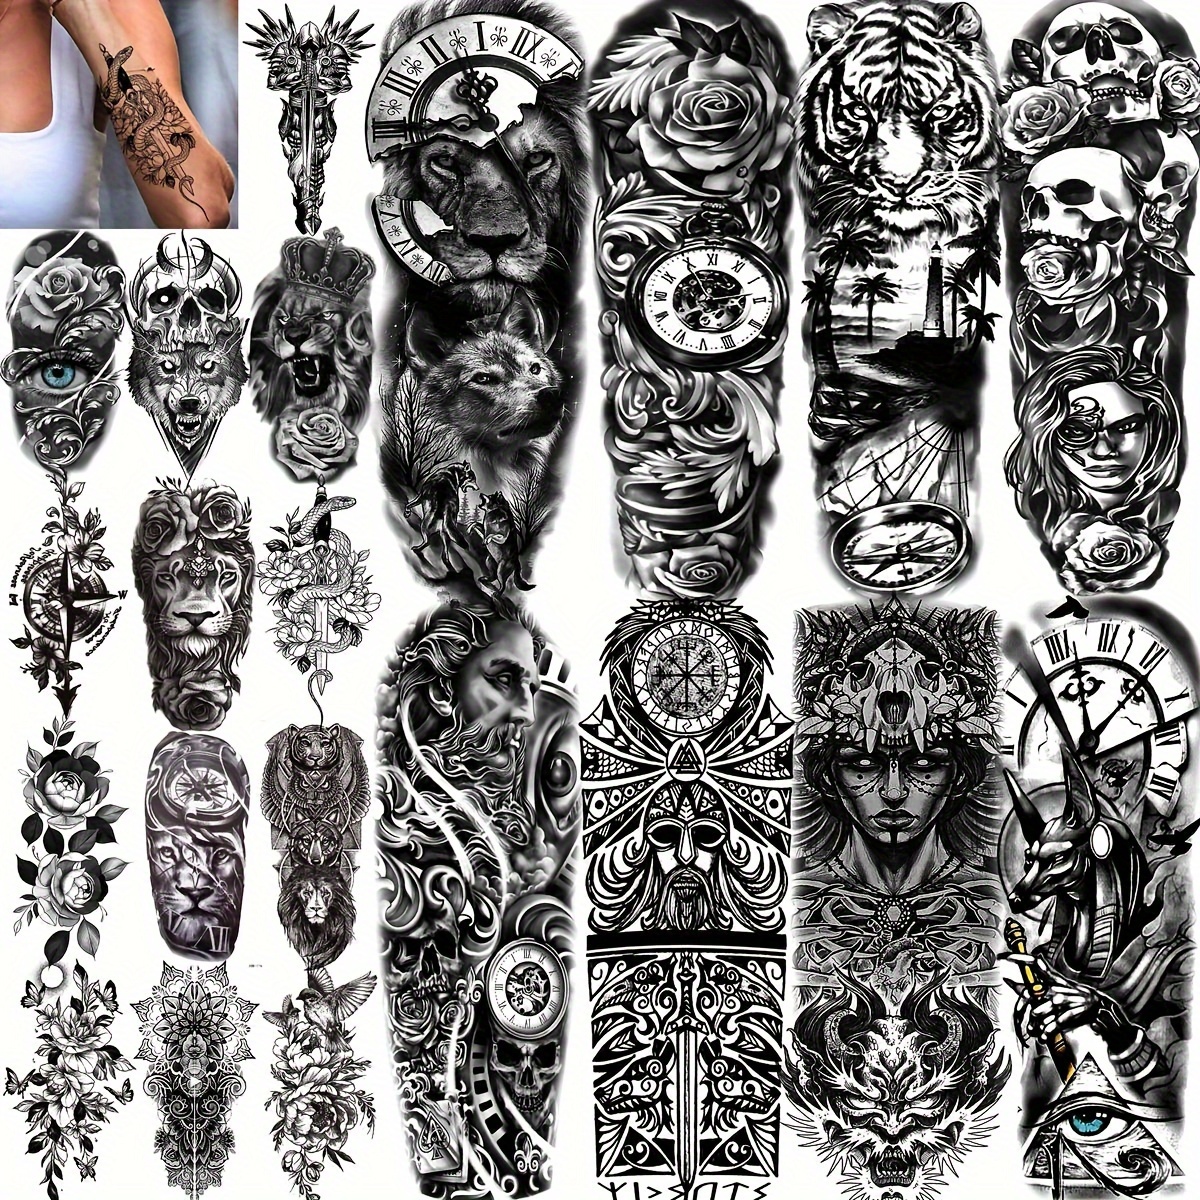 42 Sheets Temporary Tattoos Stickers (Include 10 Sheets Large Stickers),  Fake Body Arm Chest Shoulder Tattoos for Men and Women 42 Sheets